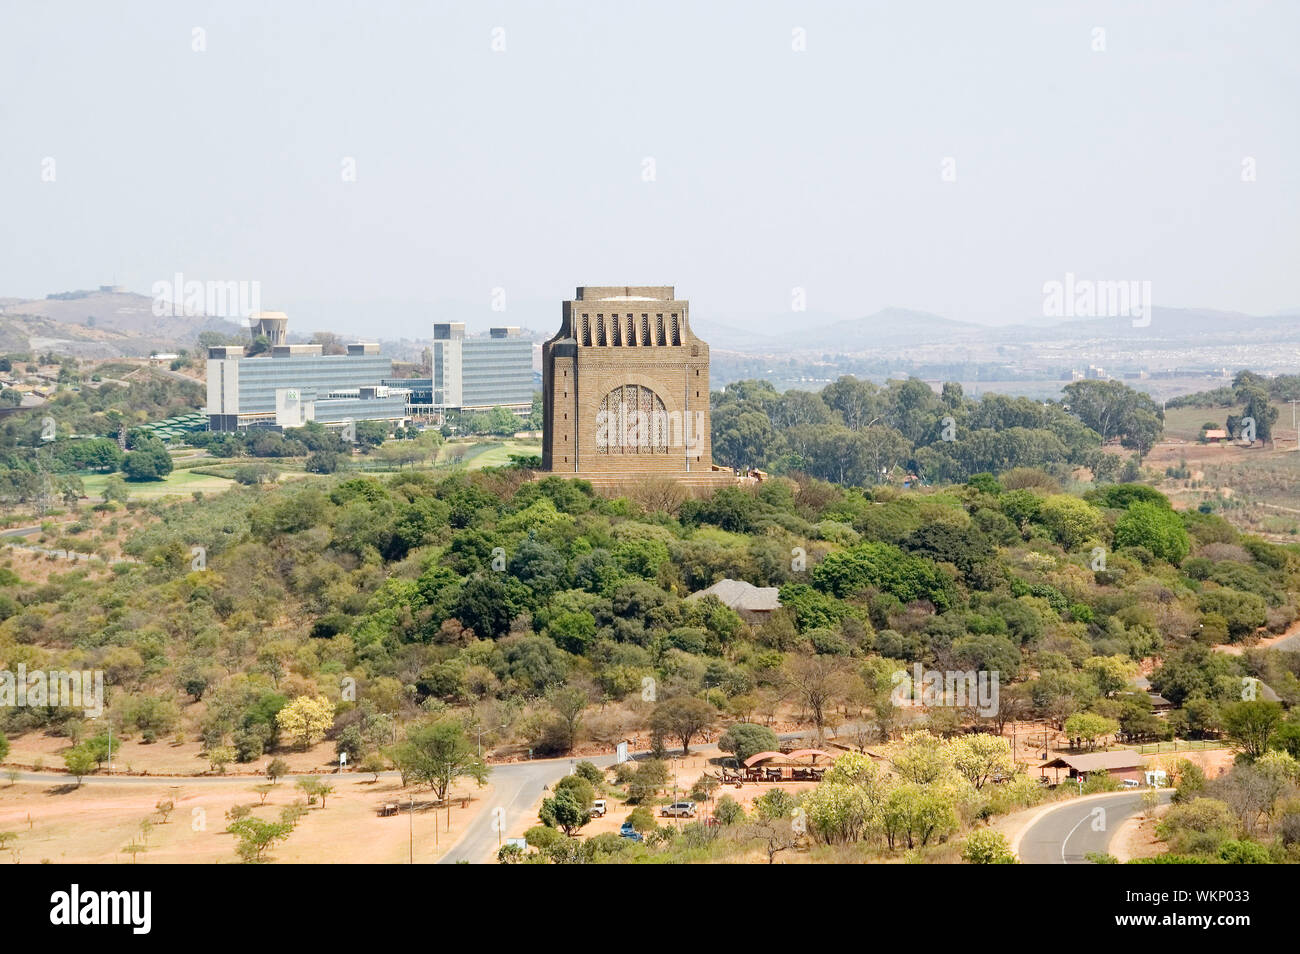 The Voortrekker Monument on Monument Hill in Pretoria, South Africa as seen from Fort Skanskop Stock Photo